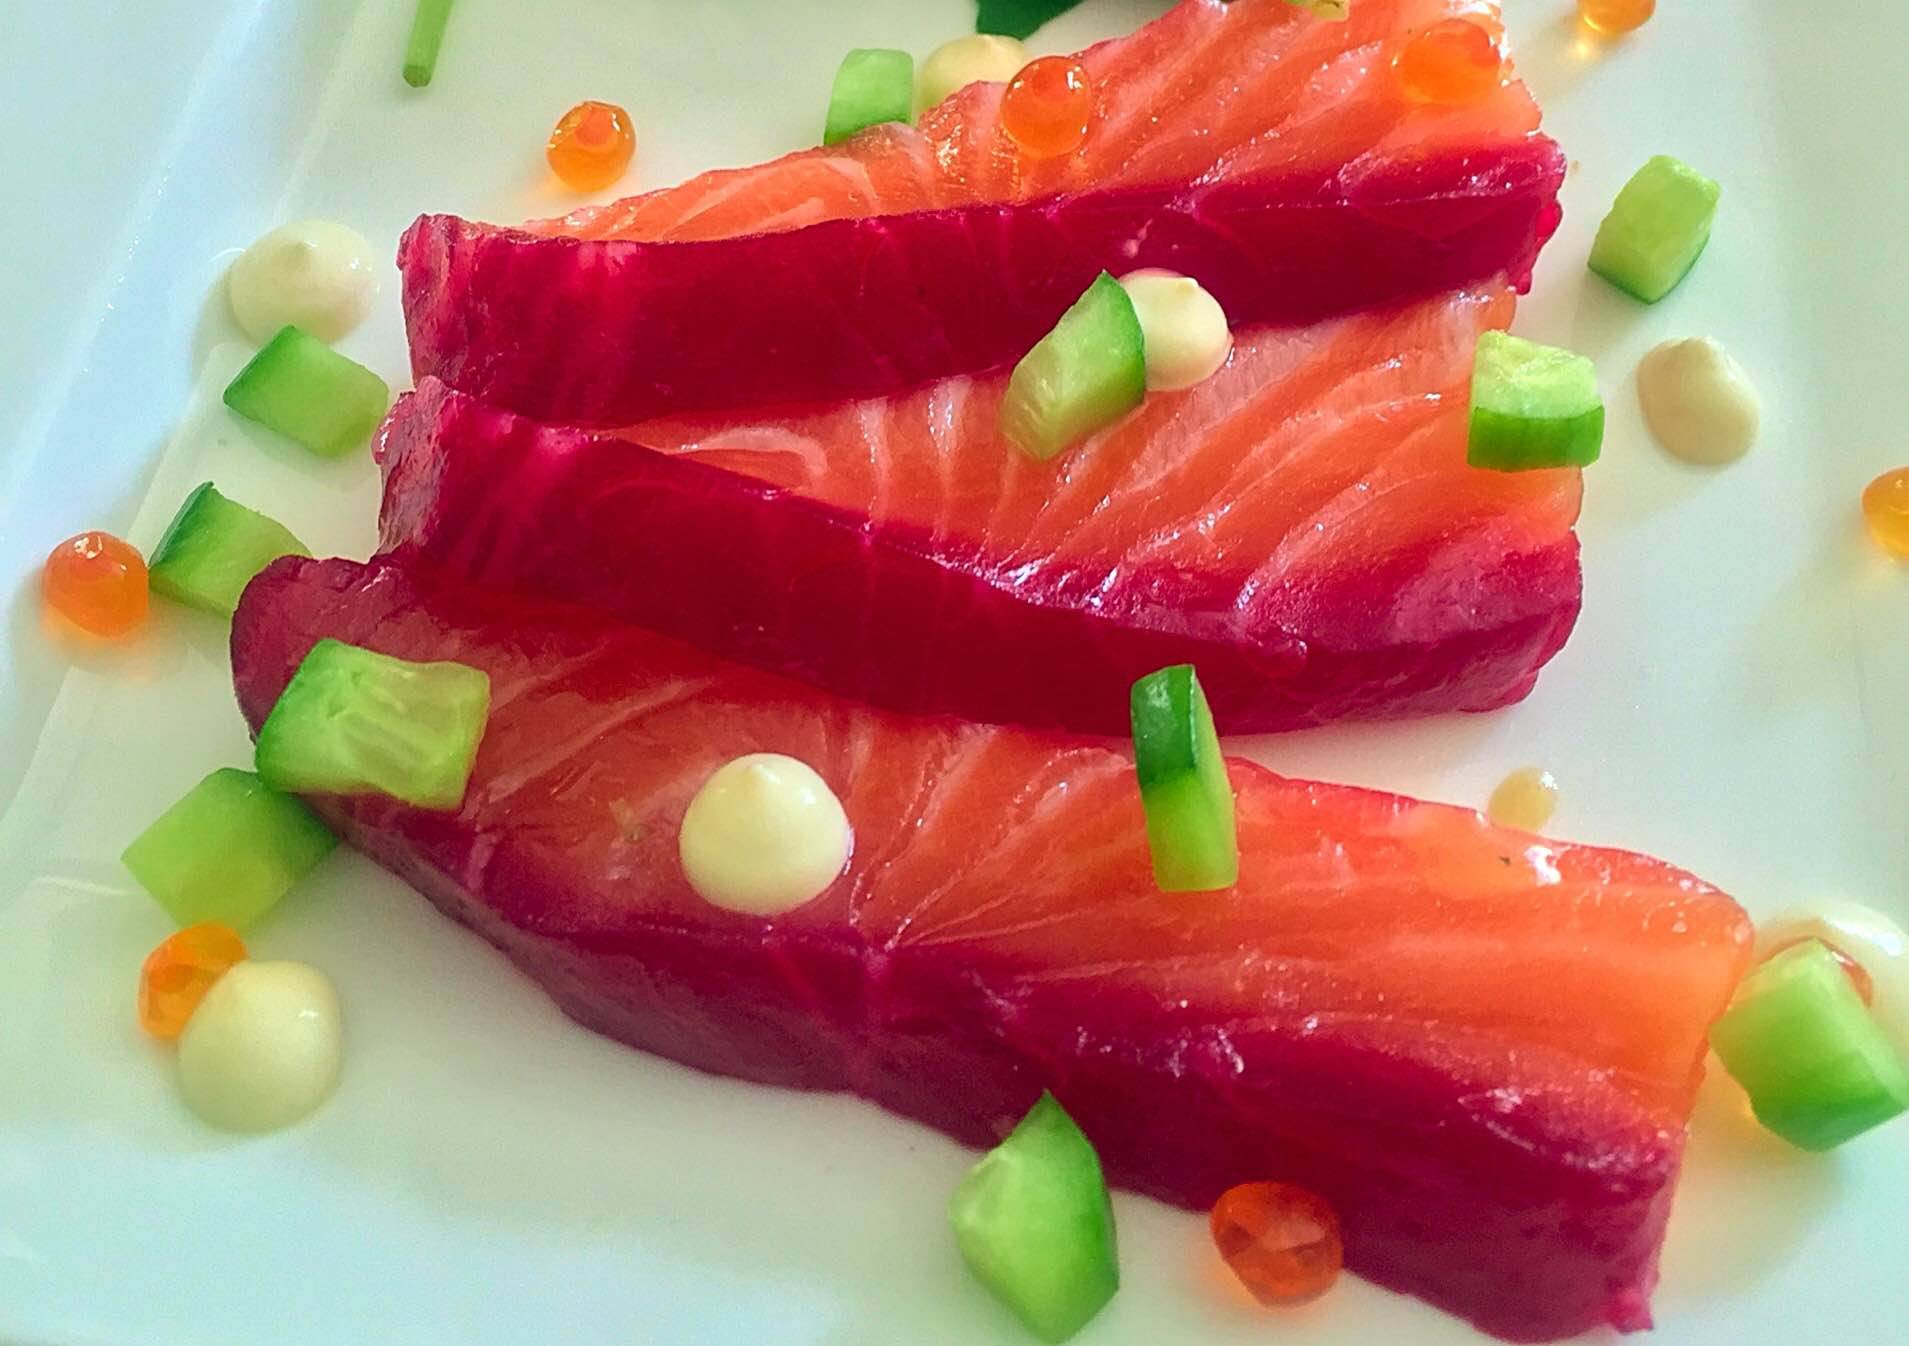 7832210_web1_Beet-Cured-Salmon-Courtesy-of-Young-and-hungry.za